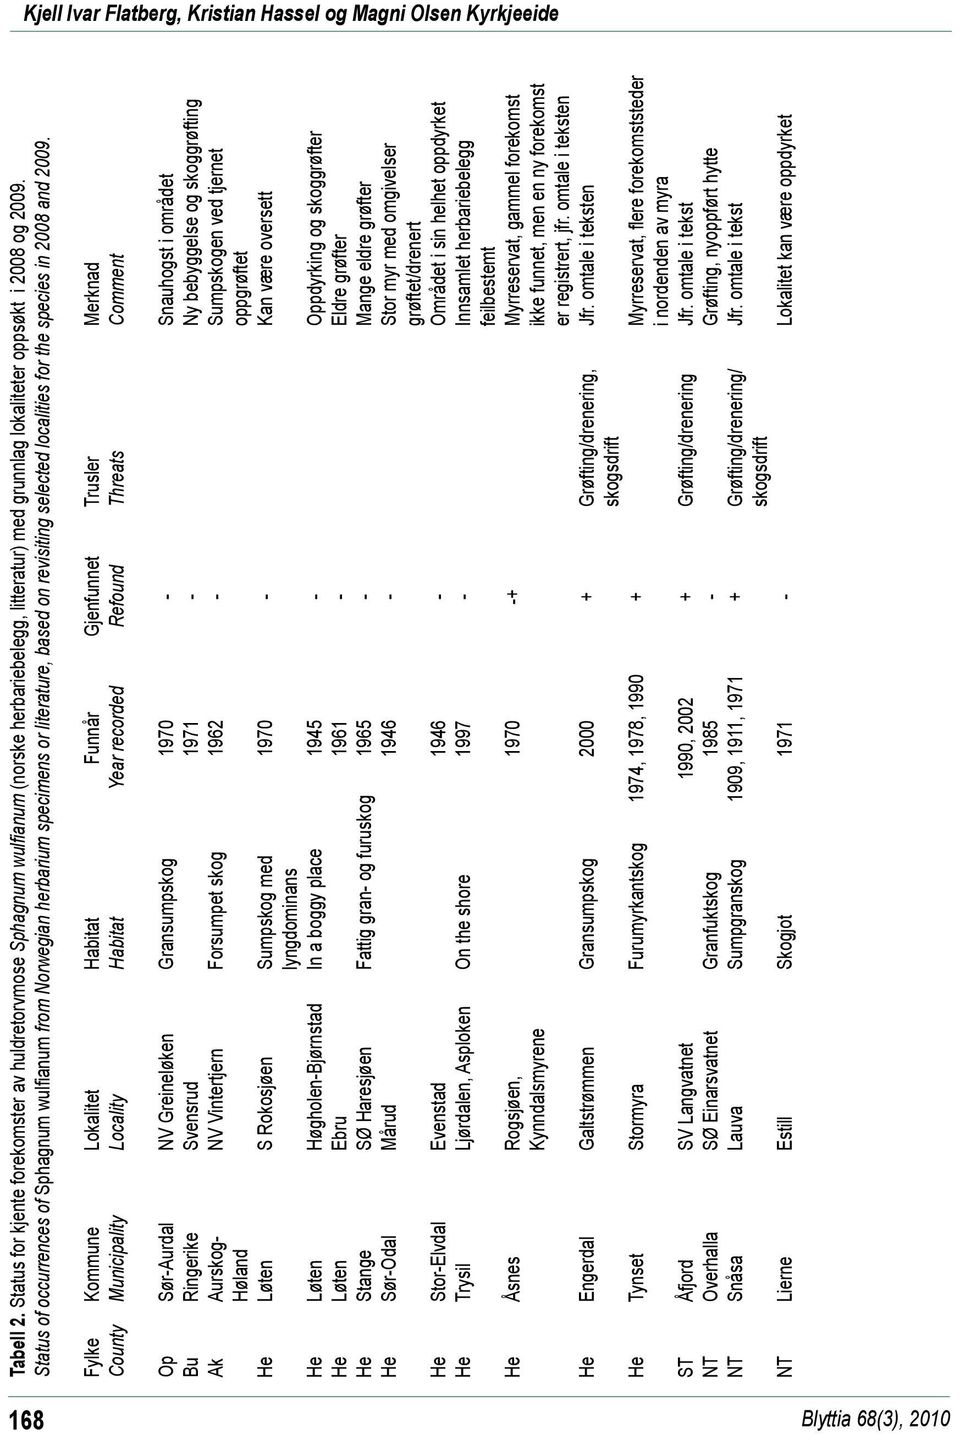 Status of occurrences of Sphagnum wulfianum from Norwegian herbarium specimens or literature, based on revisiting selected localities for the species in 2008 and 2009.